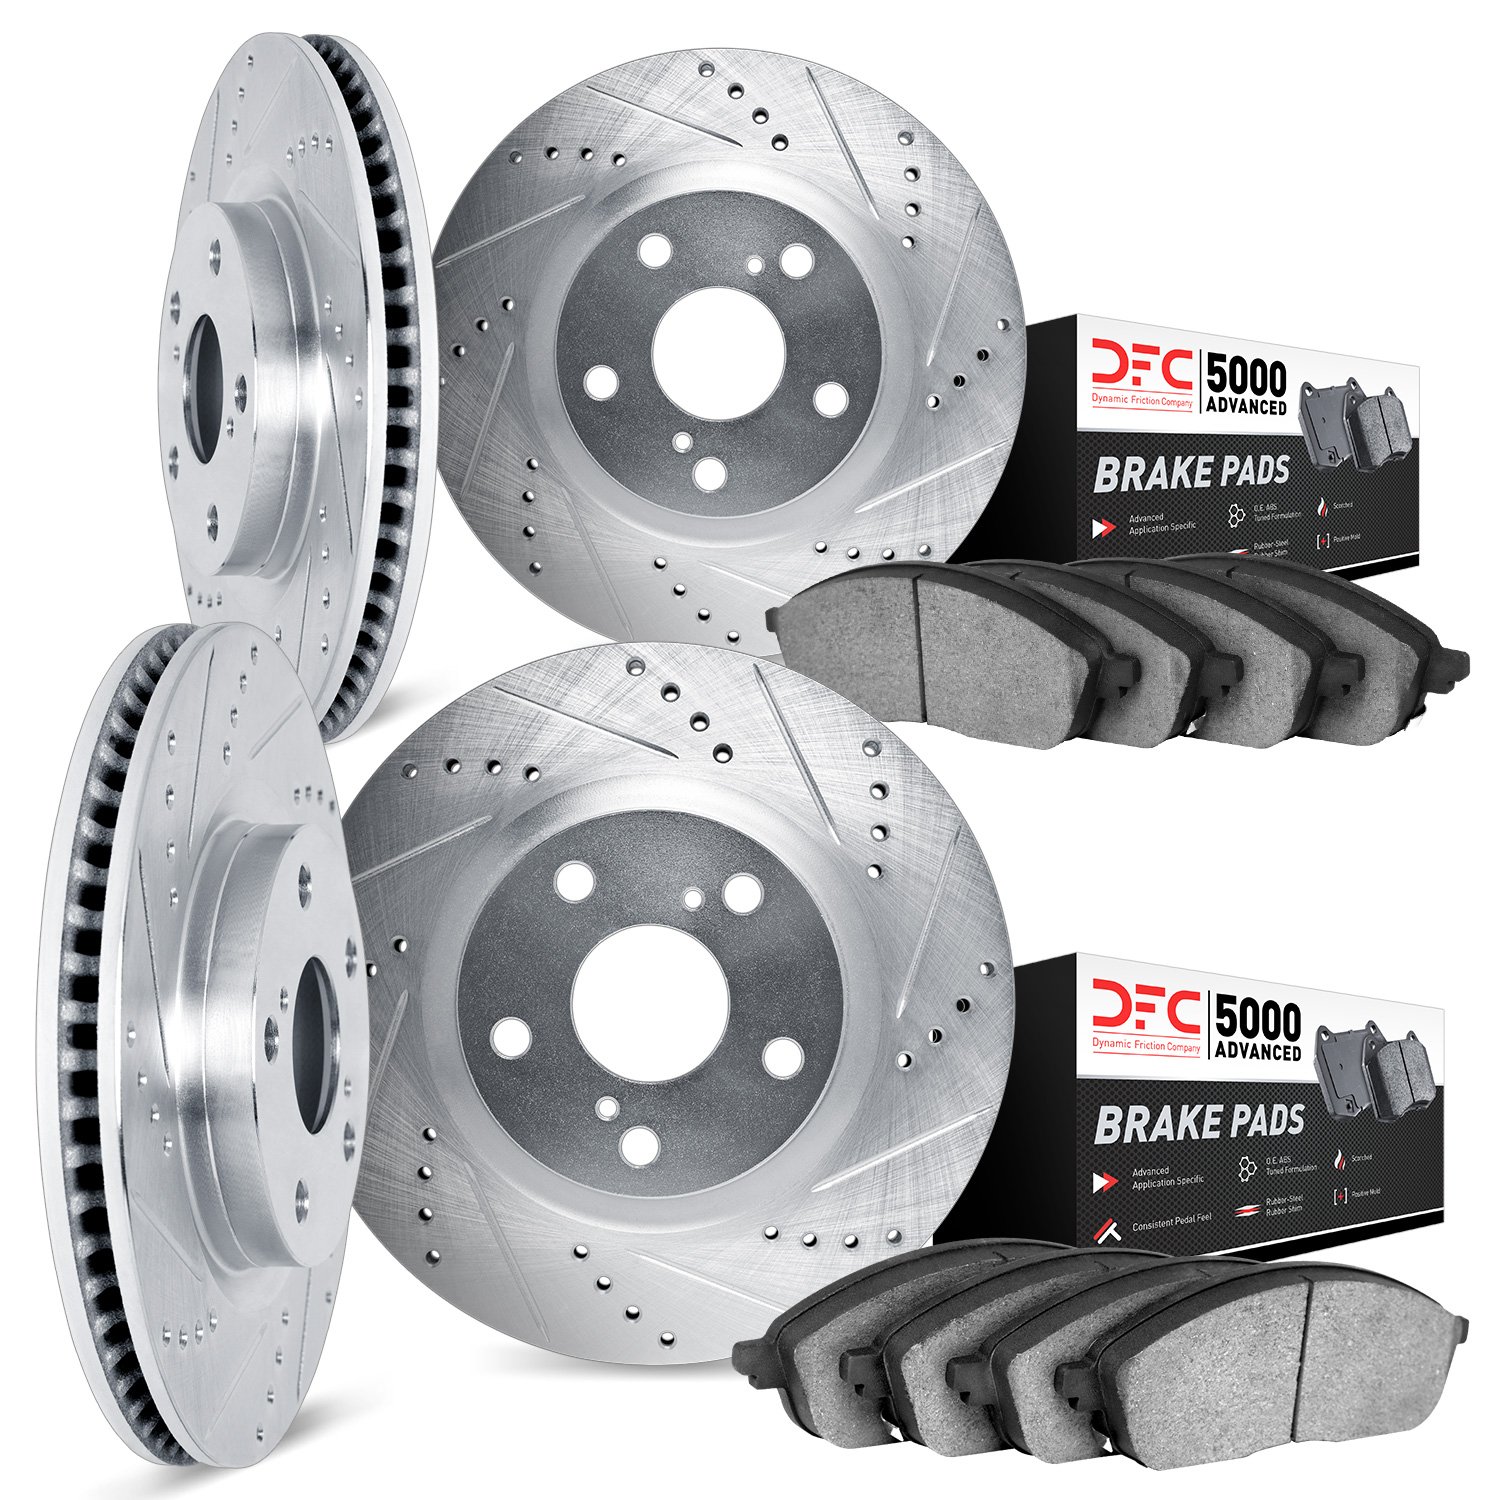 7504-54304 Drilled/Slotted Brake Rotors w/5000 Advanced Brake Pads Kit [Silver], 2007-2008 Ford/Lincoln/Mercury/Mazda, Position: